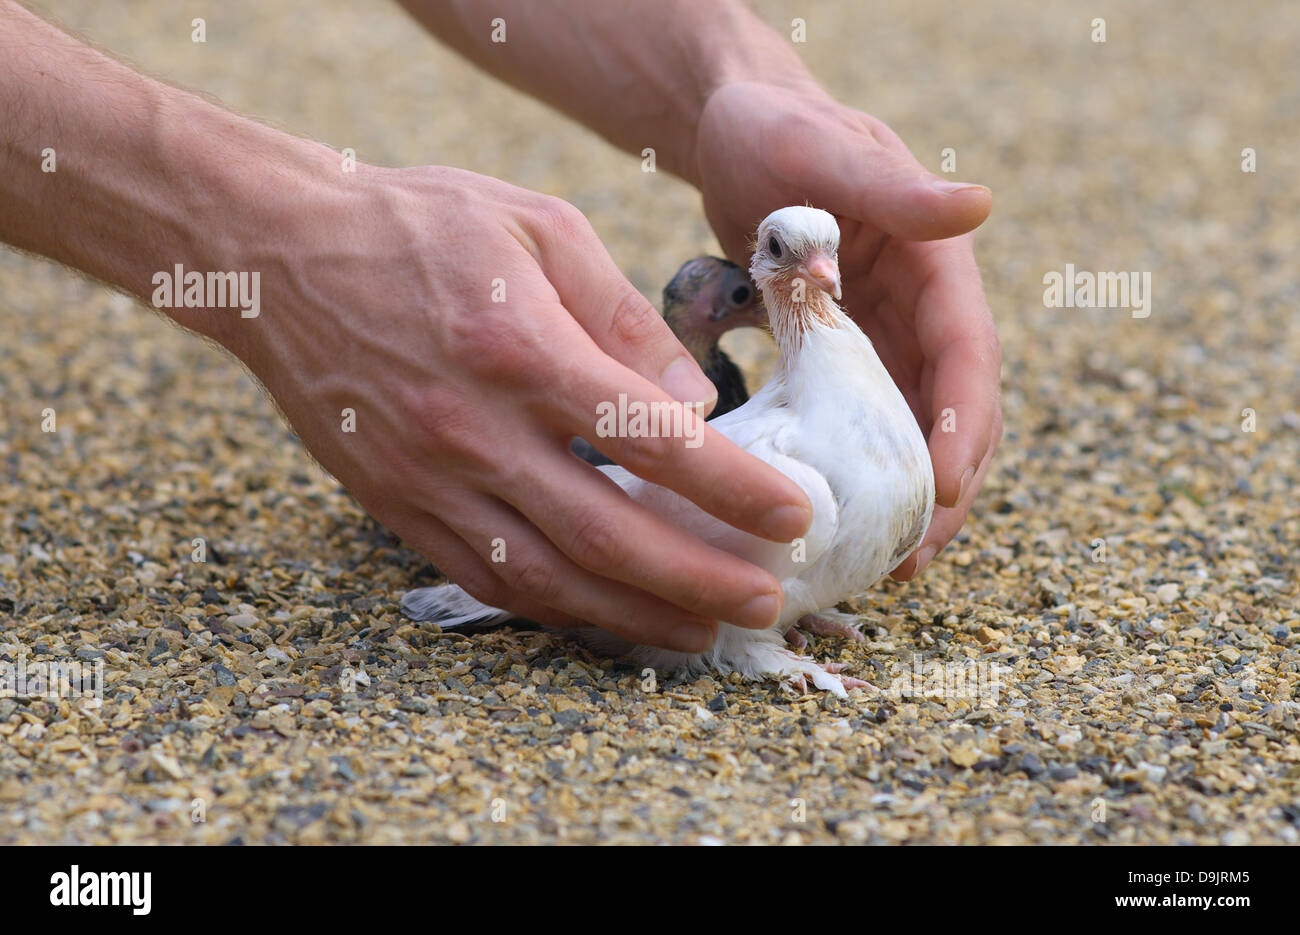 Pigeon Nestling Bird white on sand and Man Hands holding Birds Enter to the new world of baby dove Stock Photo